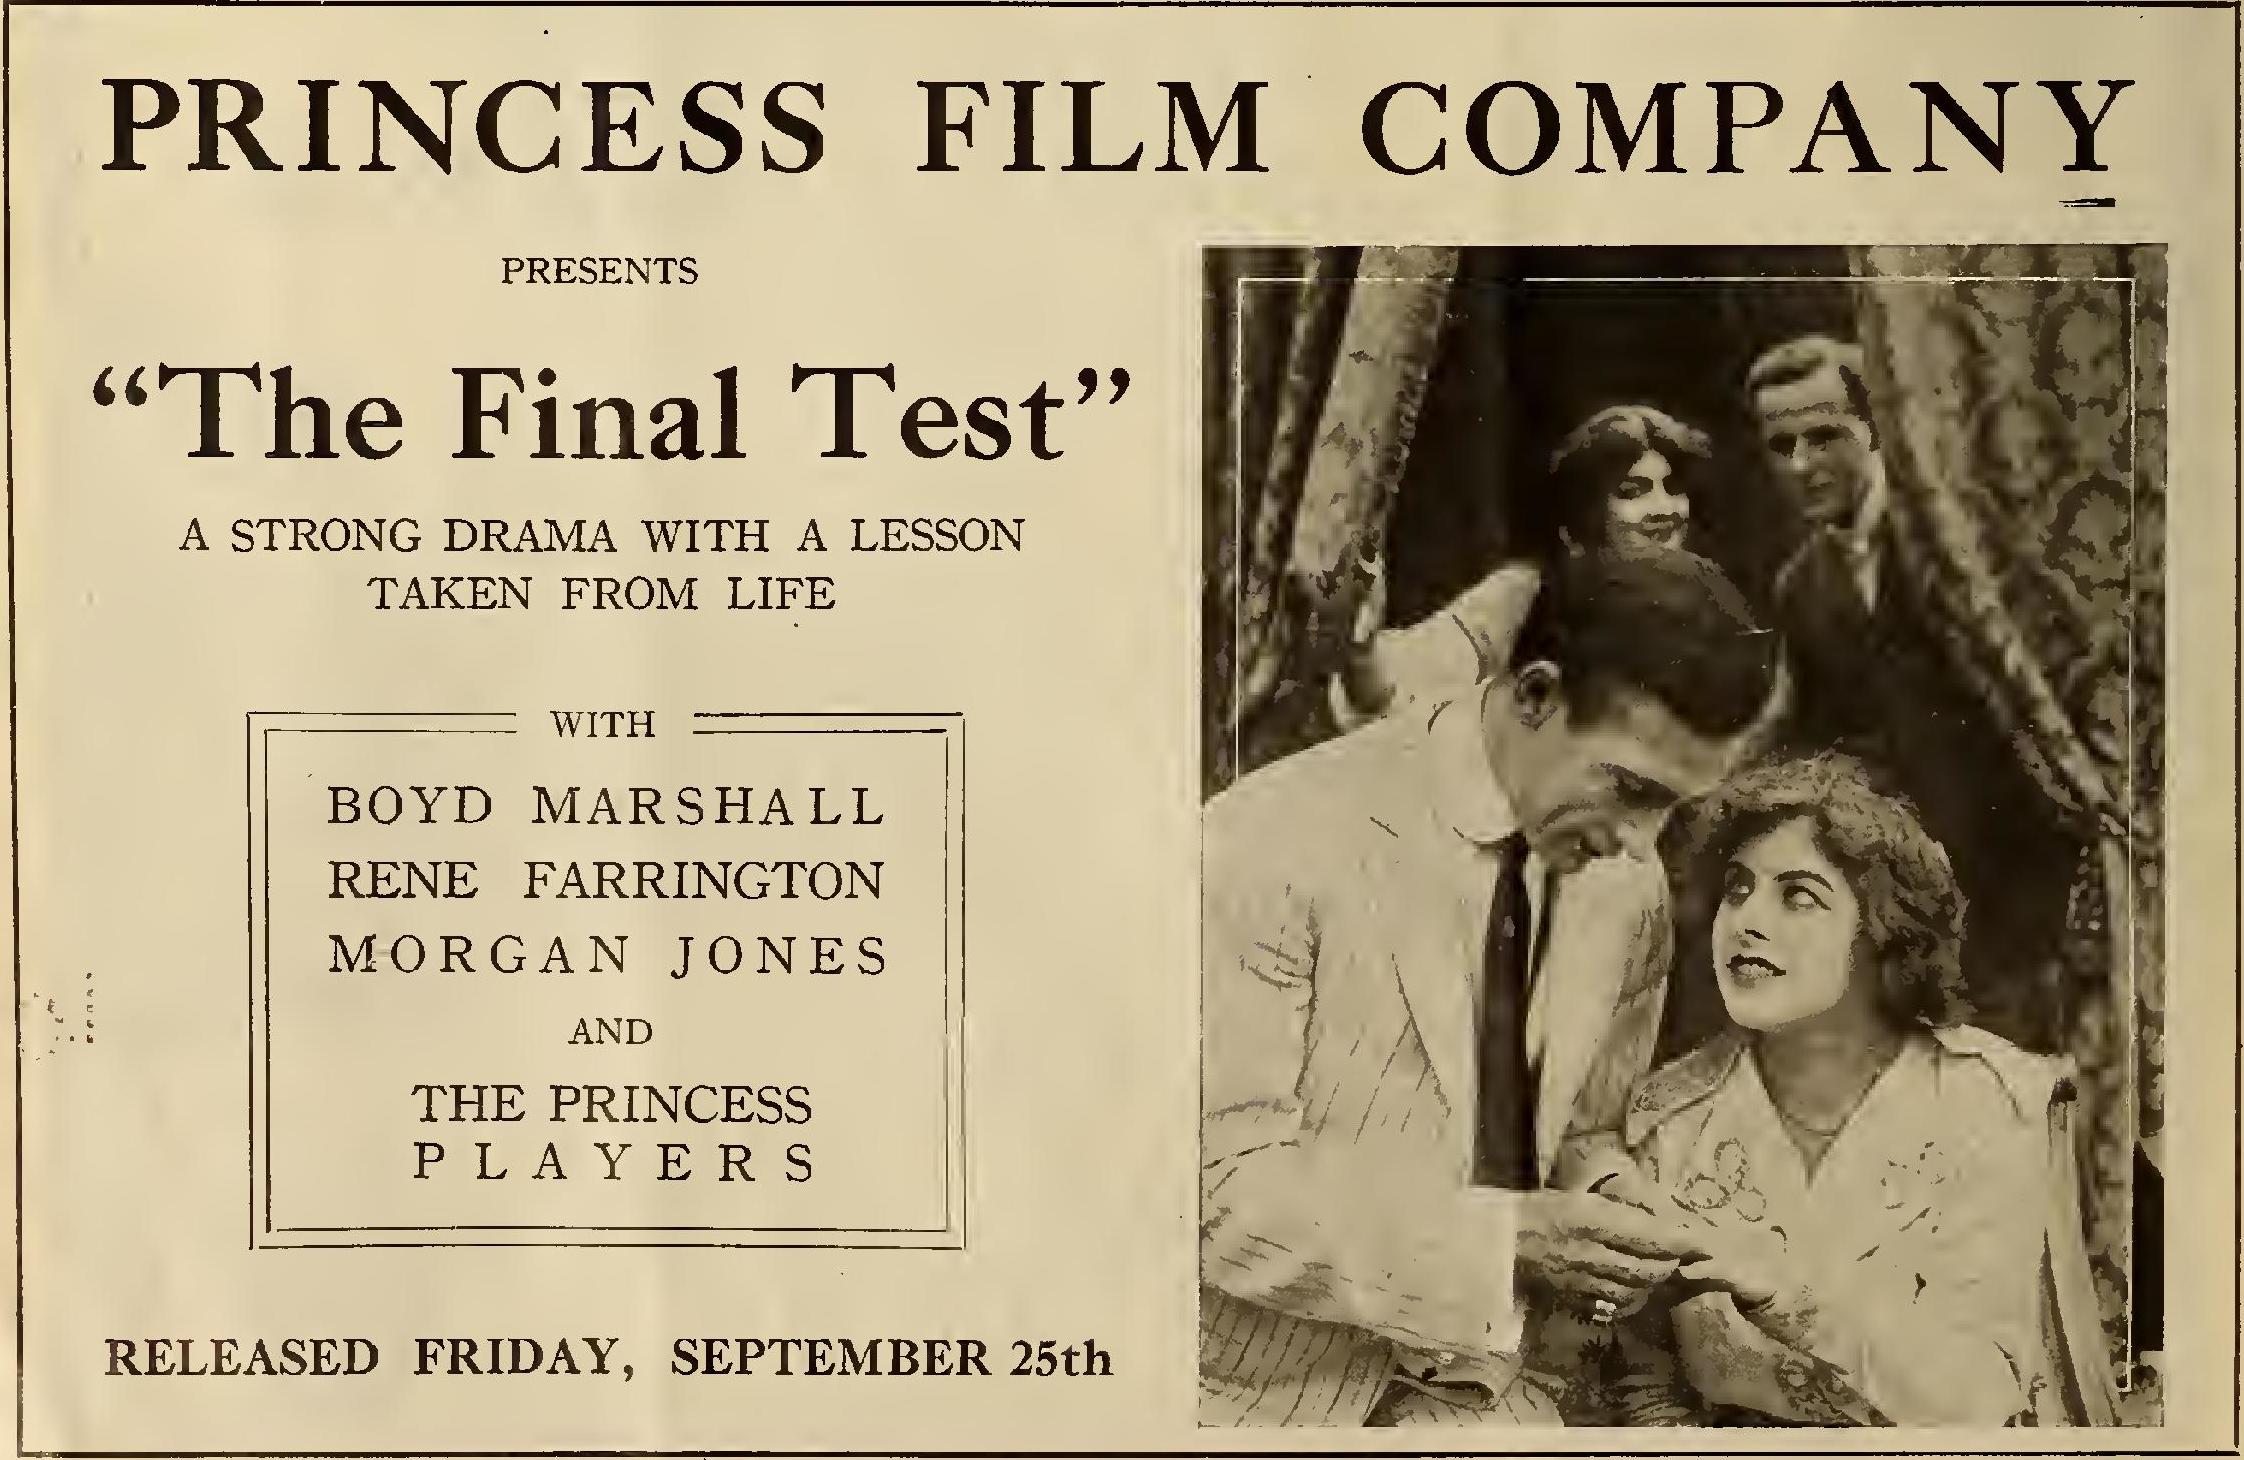 File:Princess Film Company, The Final Test ad detail, from- Reel